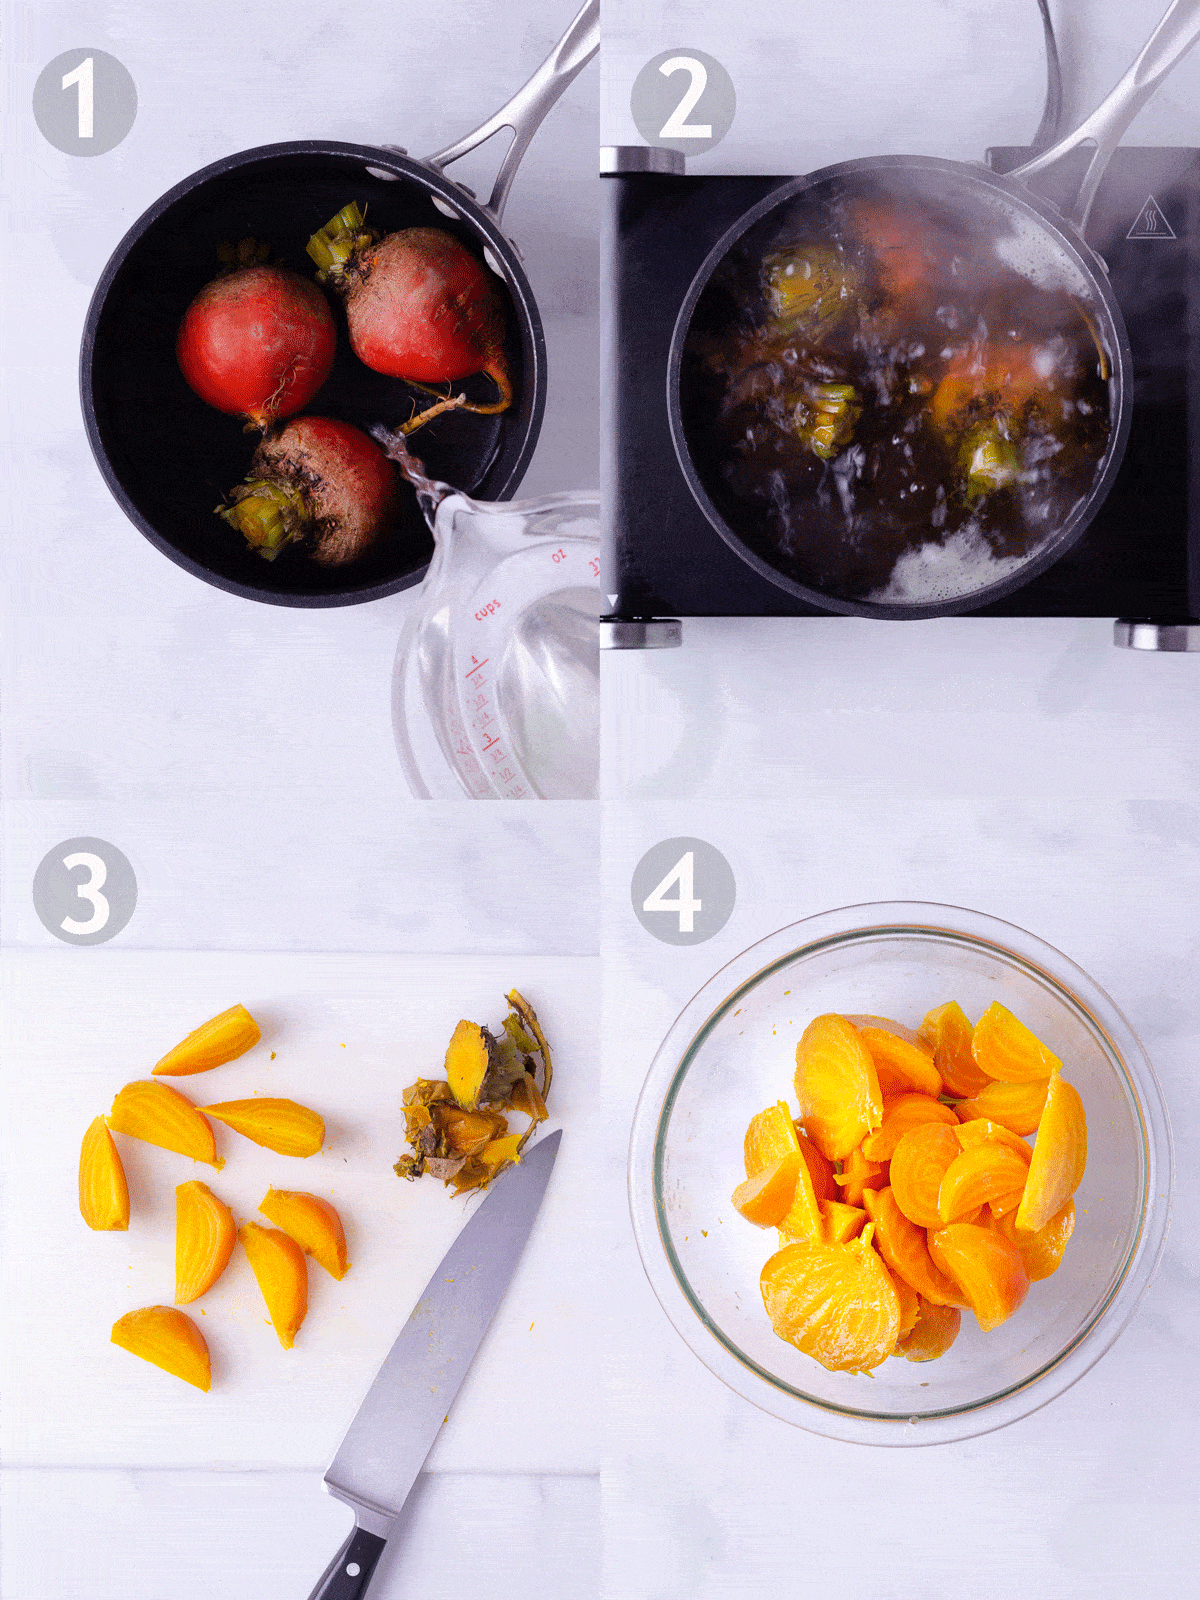 Step by step photos of boiling, peeling, slicing and seasoning beets.